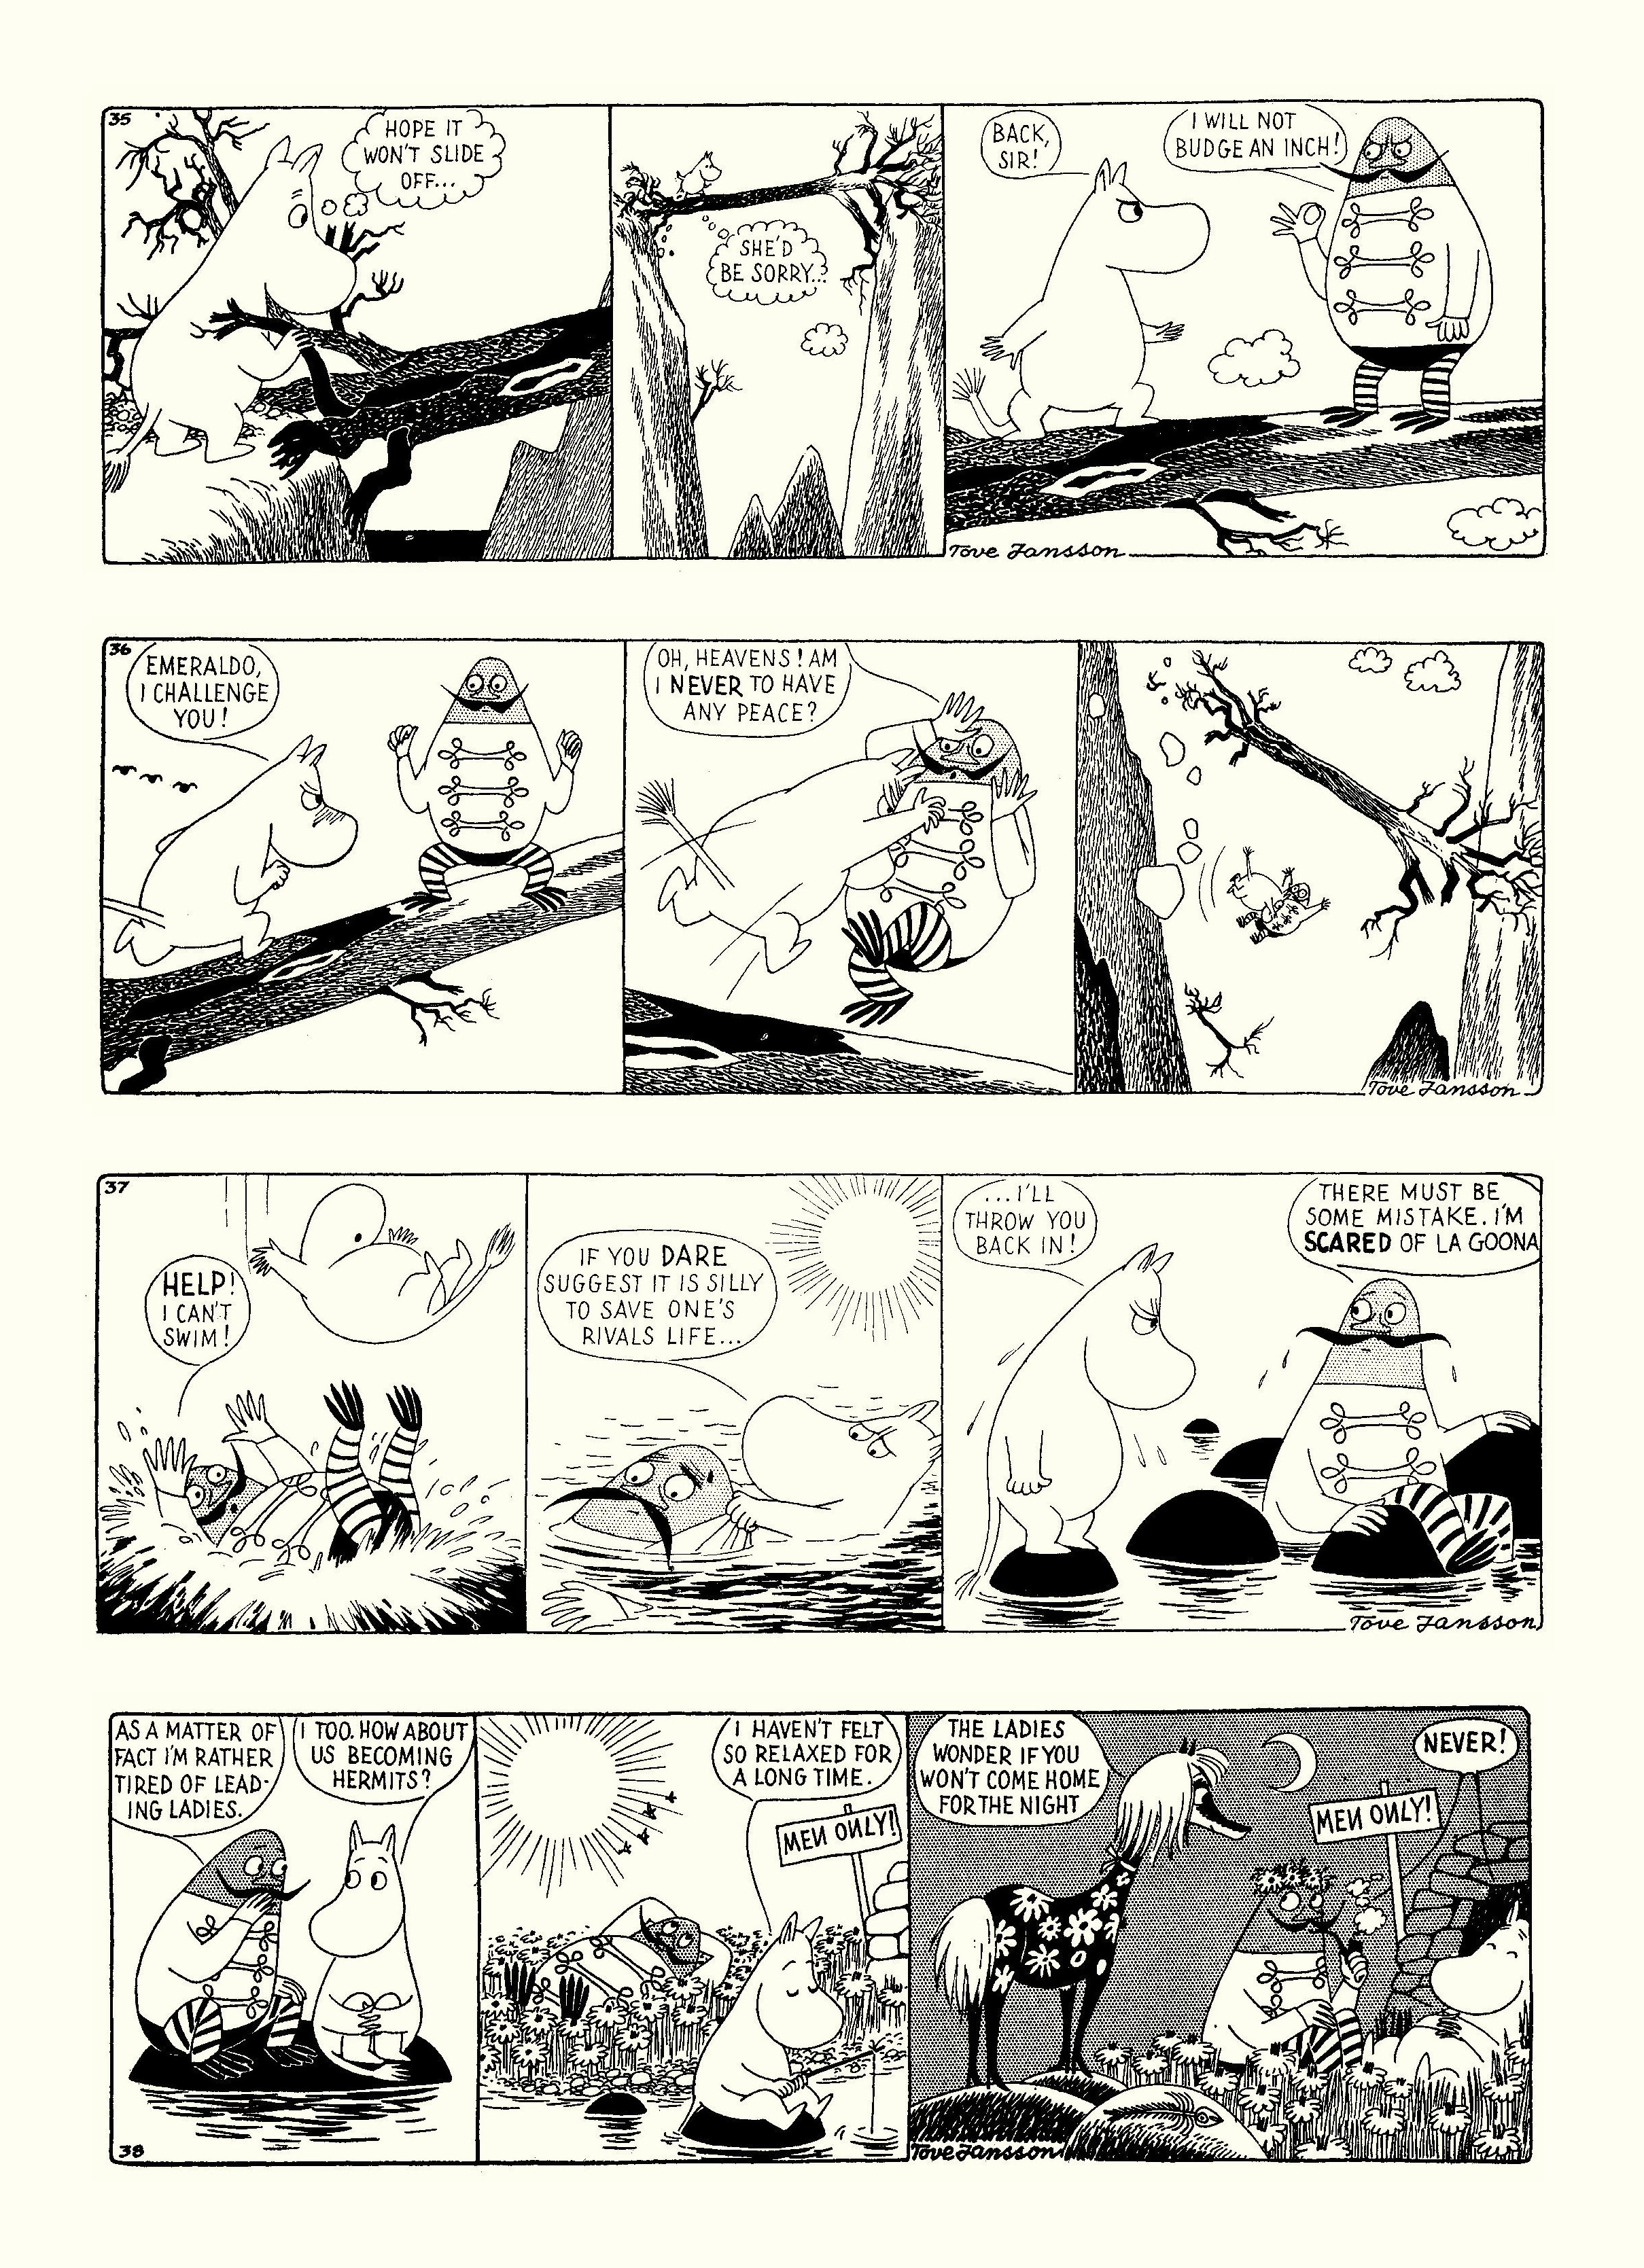 Read online Moomin: The Complete Tove Jansson Comic Strip comic -  Issue # TPB 3 - 15